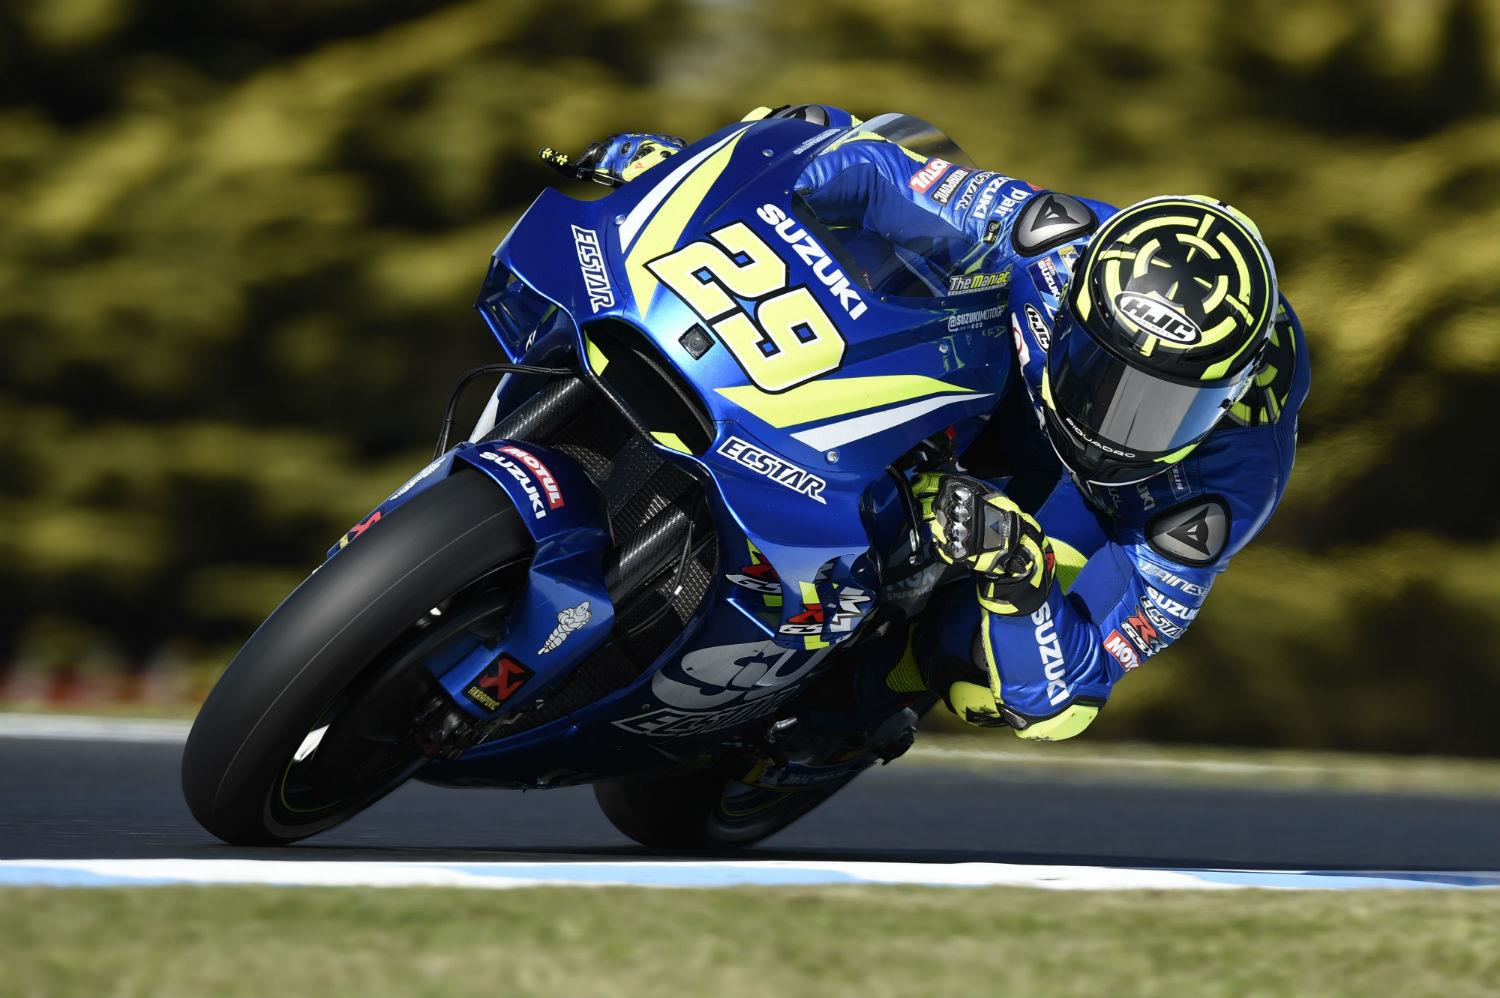 MotoGP: Iannone leads opening day at Phillip Island